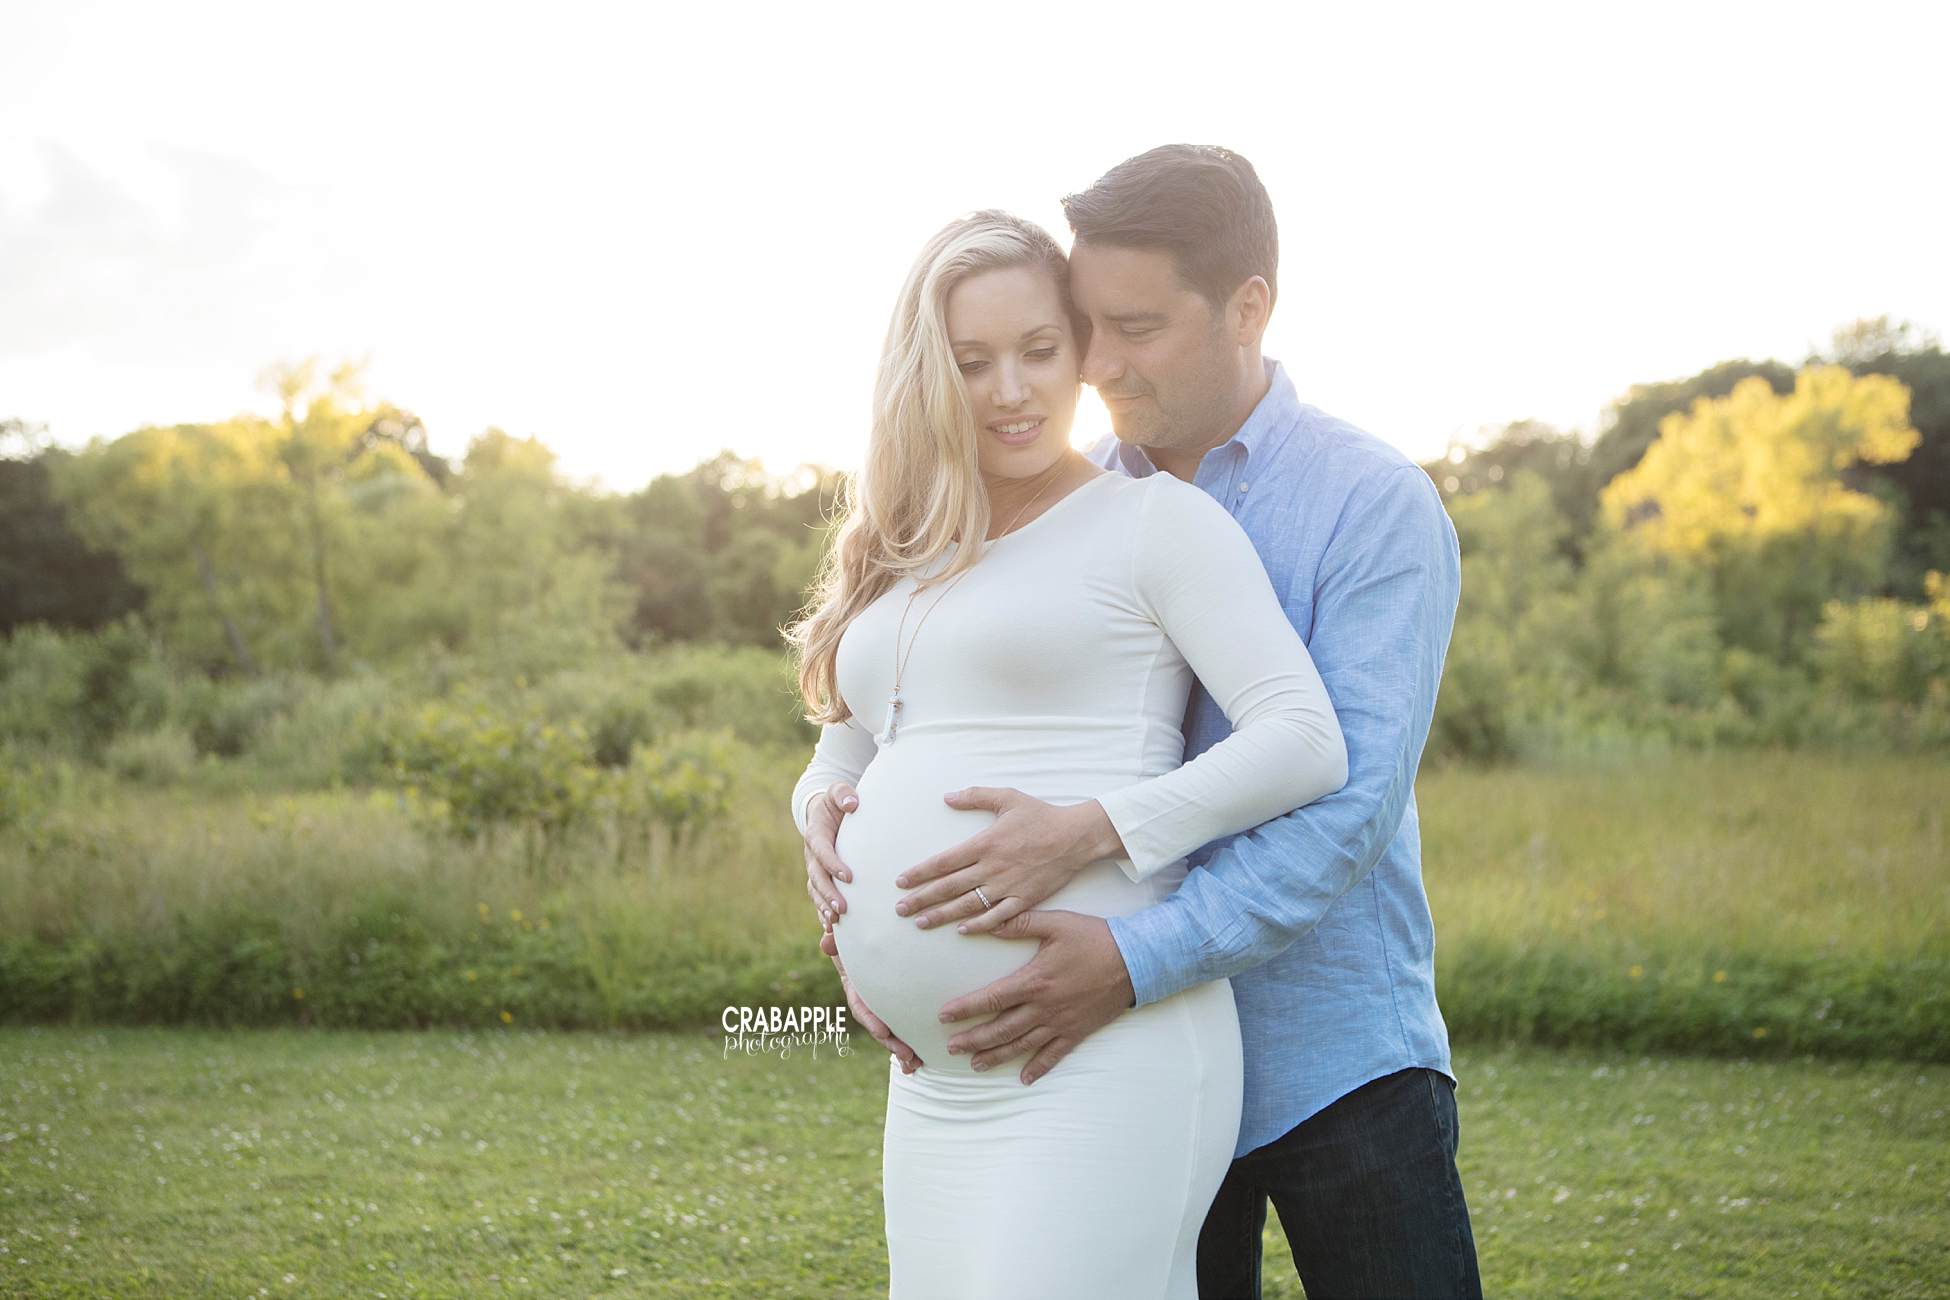 Why invest in a maternity photography session? — Newborn